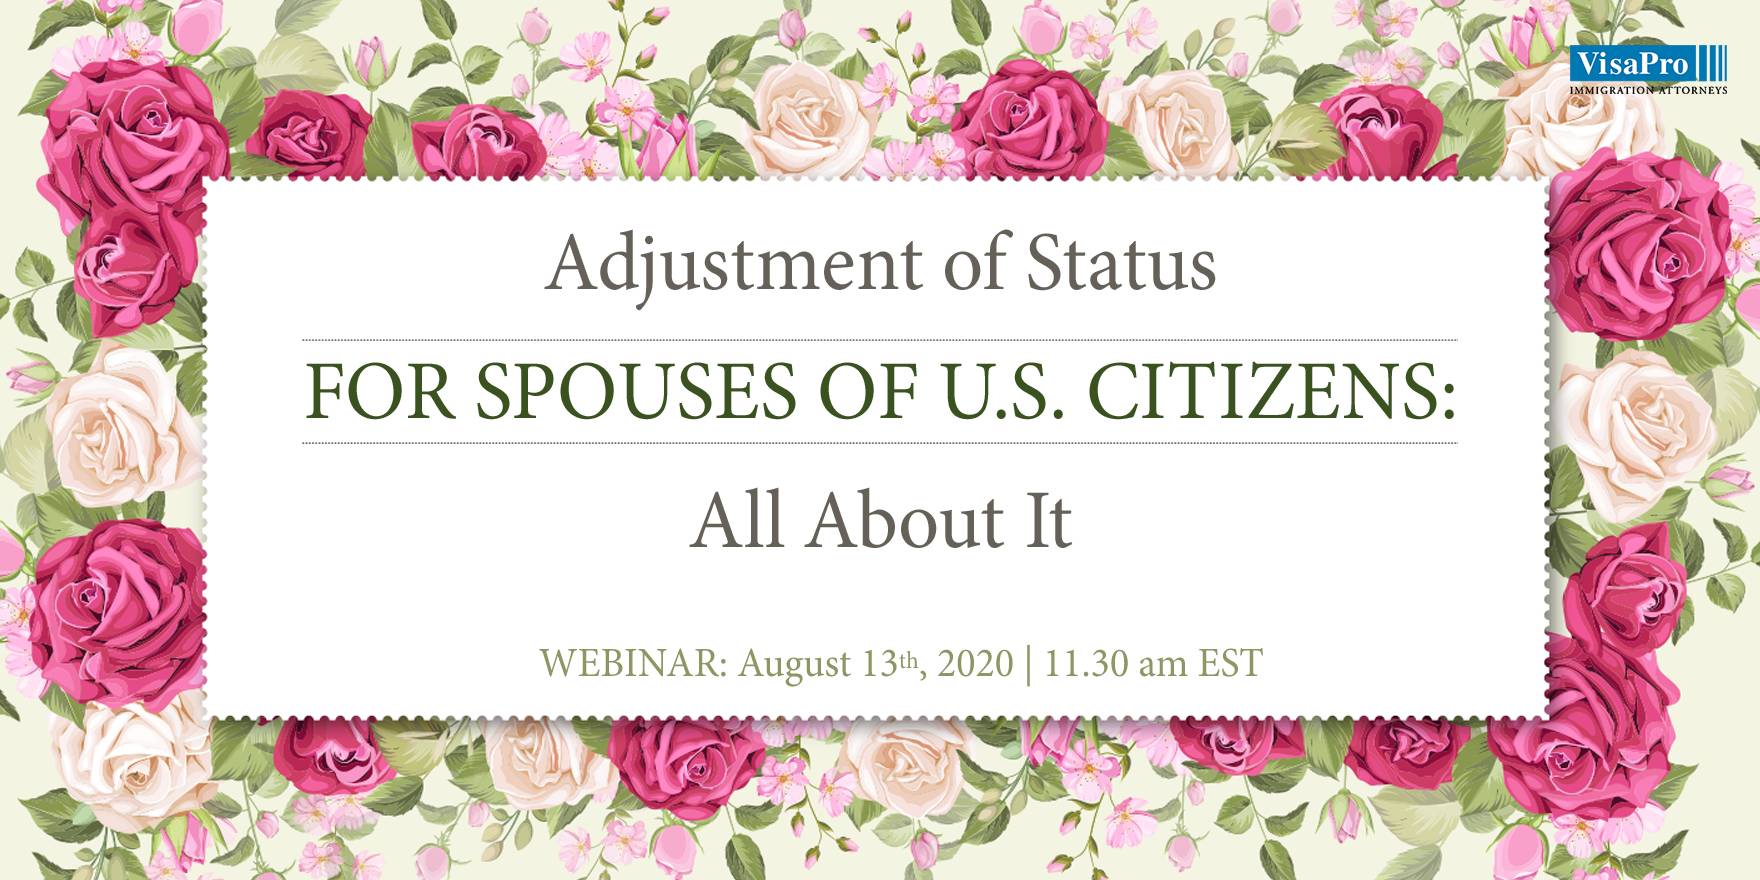 Immigration Seminar: Adjustment of Status For Spouses of U.S. Citizens - All About It, Dhaka, Bangladesh